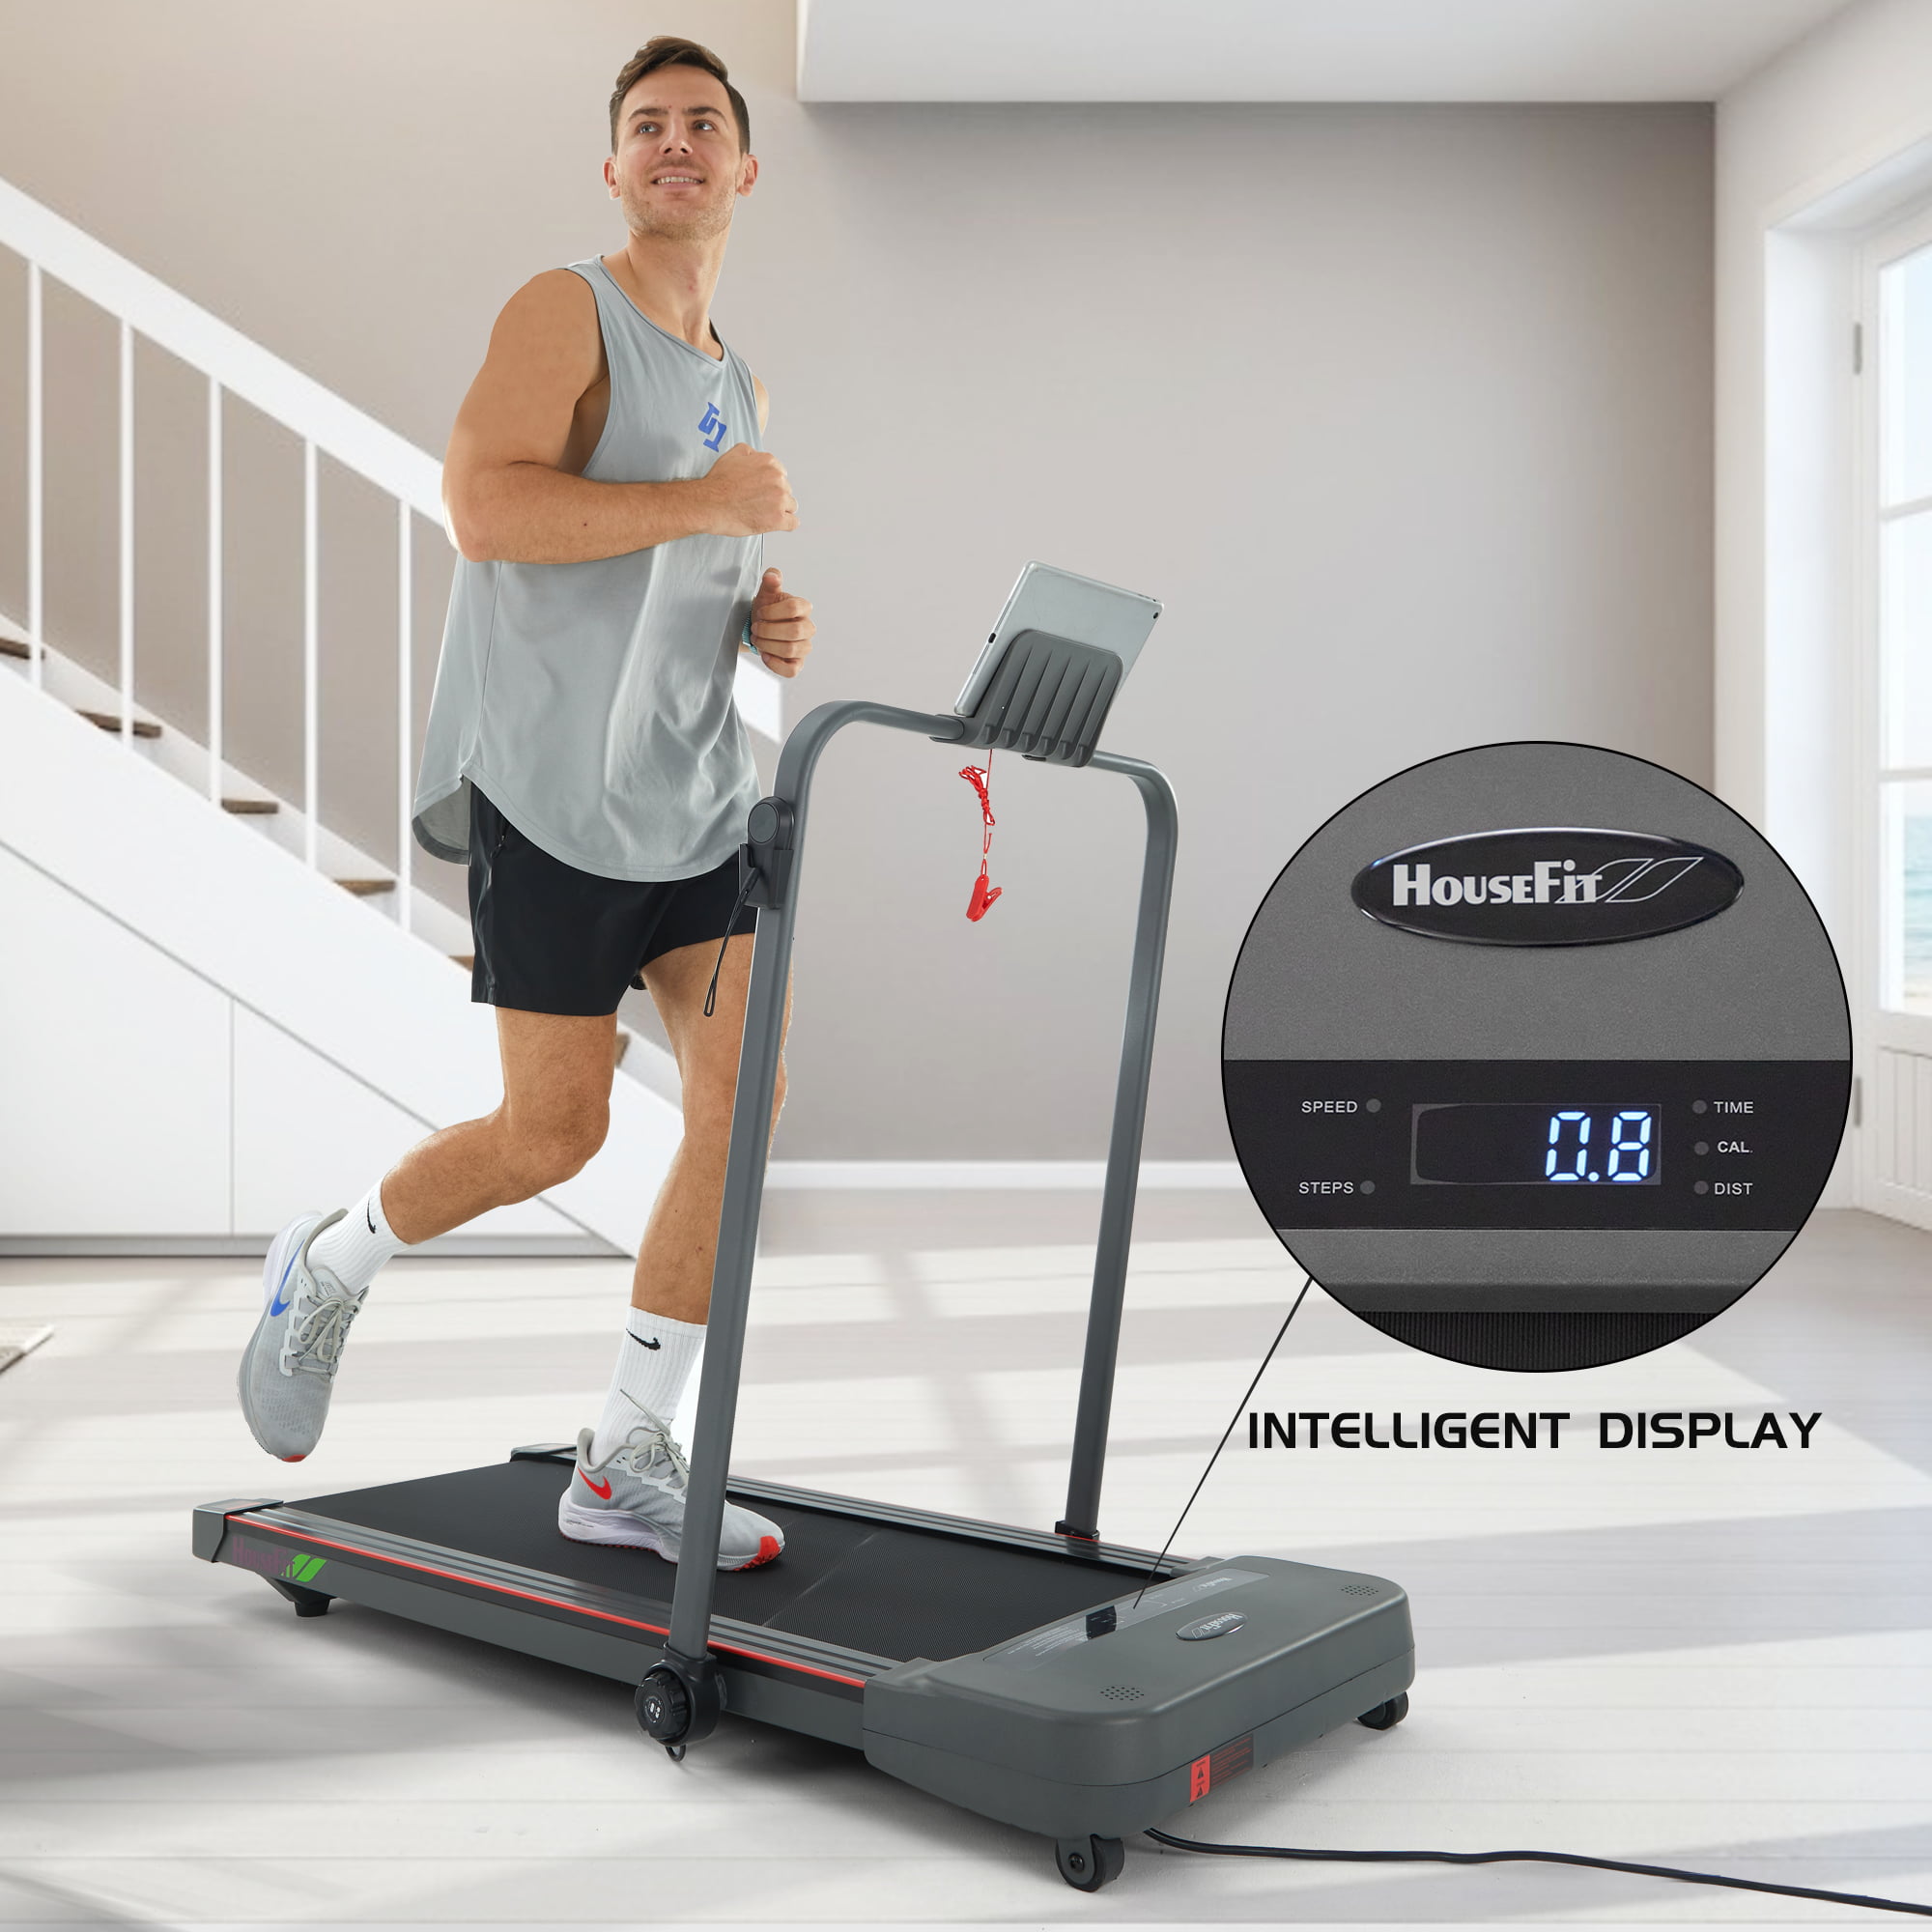 HouseFit Under Desk Treadmill with Bluetooth APP for Walking and Running Mode 2 in 1 Small Treadmill for Apartment with iPad and Phone Support LCD Display 